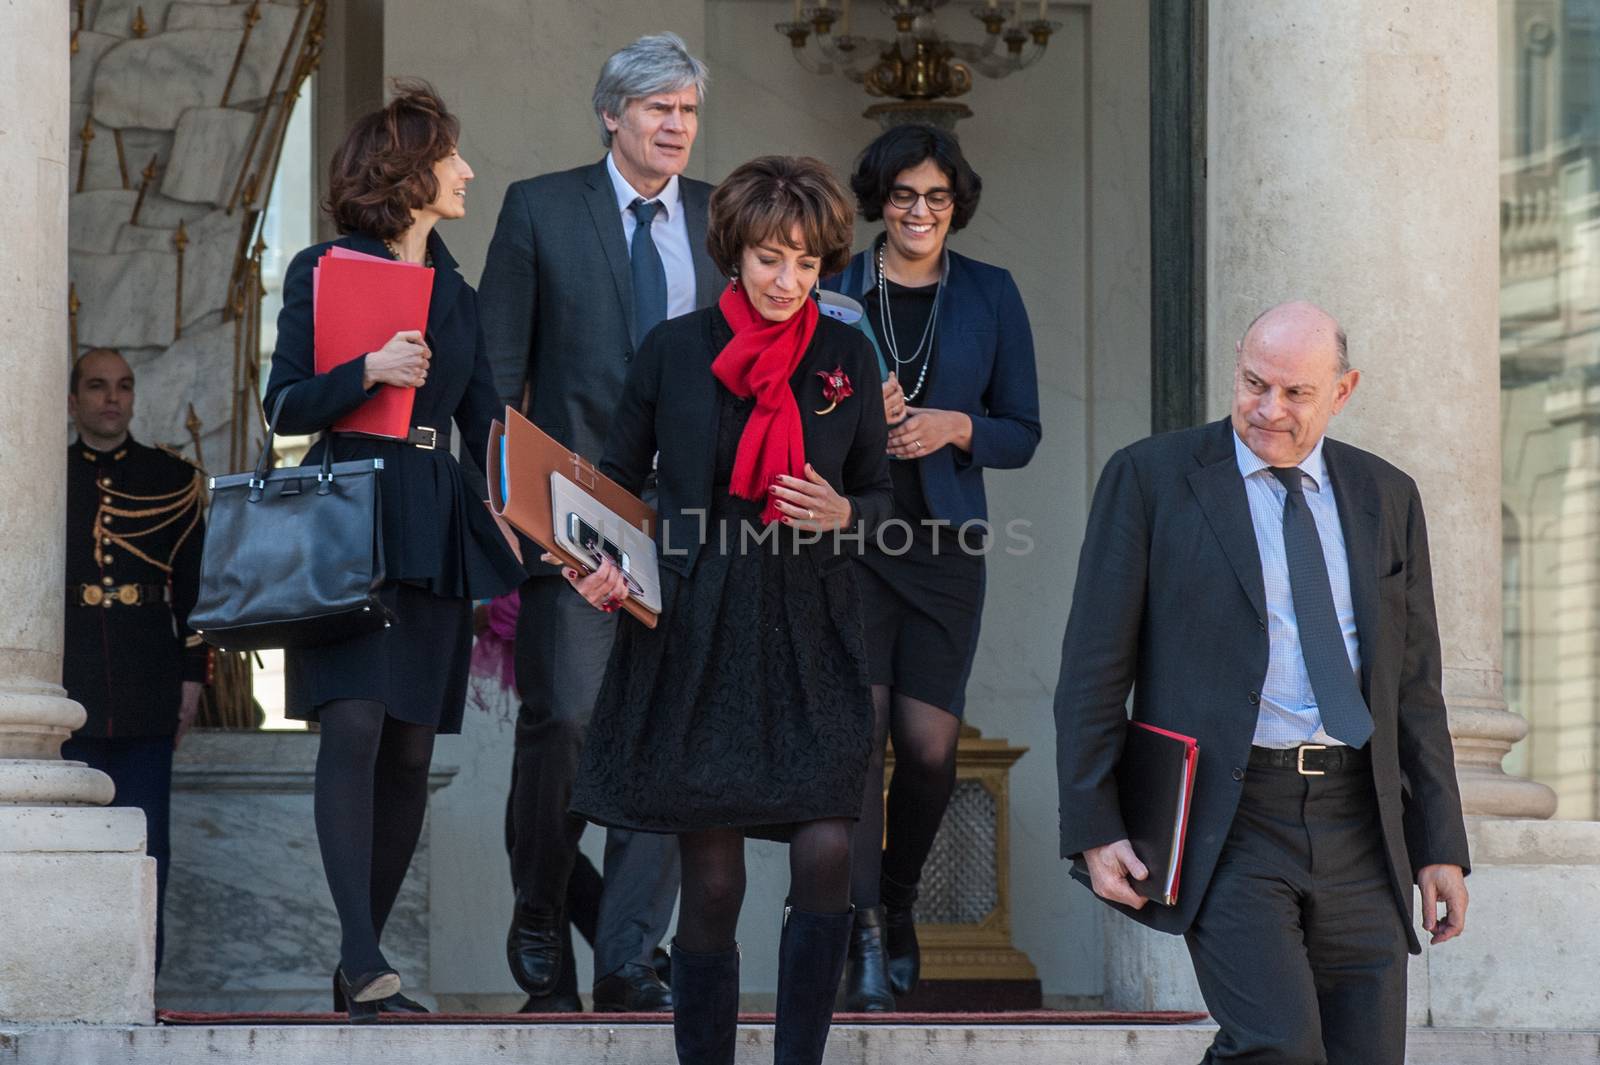 FRANCE, Paris : (From L) French Culture minister Audrey Azoulay, French Agriculture minister and Government spokesperson Stephane Le Foll, French Health minister Marisol Touraine, French Labour minister Myriam El Khomri and French junior minister for Parliamentary Relations Jean-Marie Le Guen leave the Elysee presidential Palace following the weekly cabinet meeting, on April 20, 2016 at in Paris.